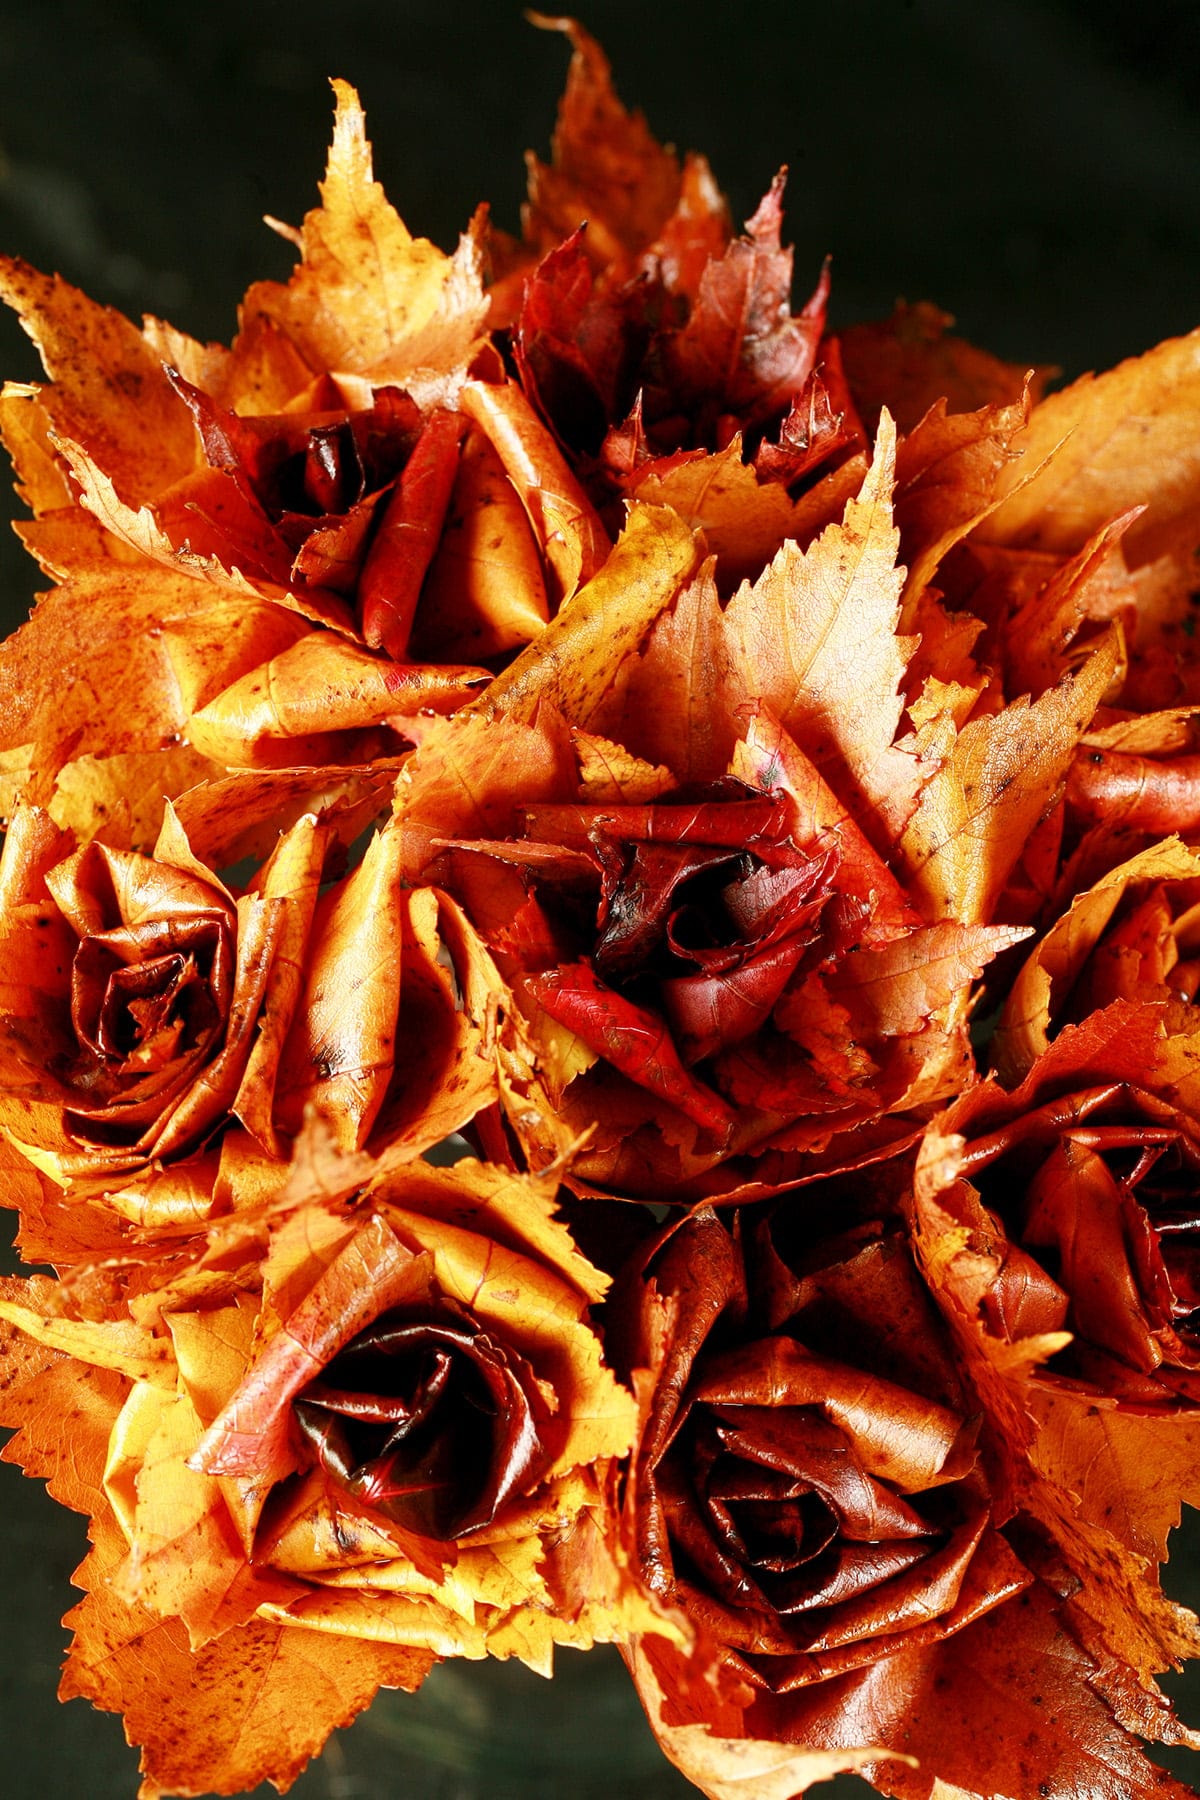 A bouquet of Maple Leaf Roses - roses that have been handcrafted from freshly fallen maple leaves.